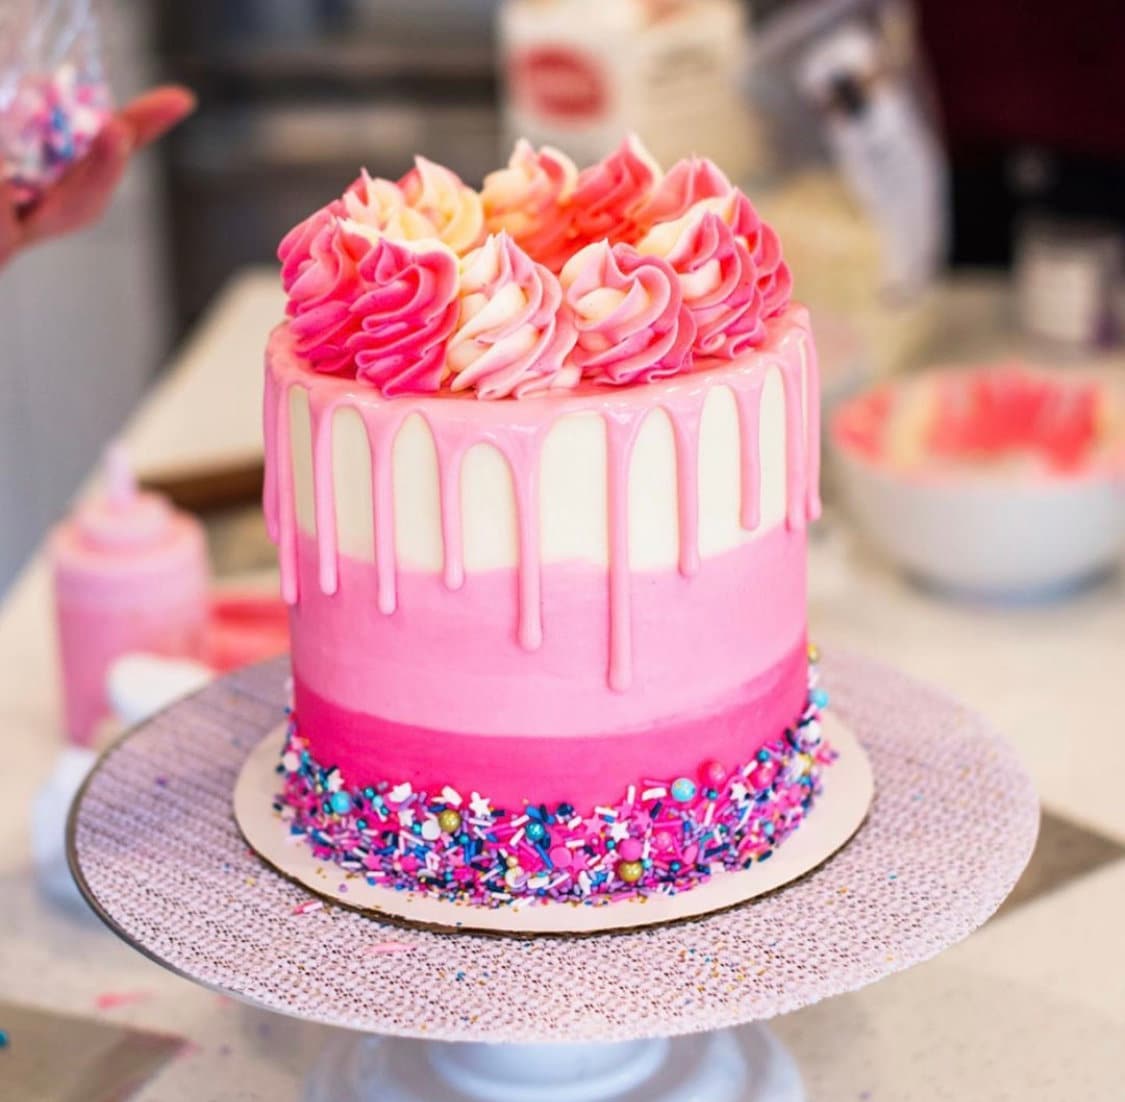 4"  Pink Ombre Drip Cake Decorating Class 201